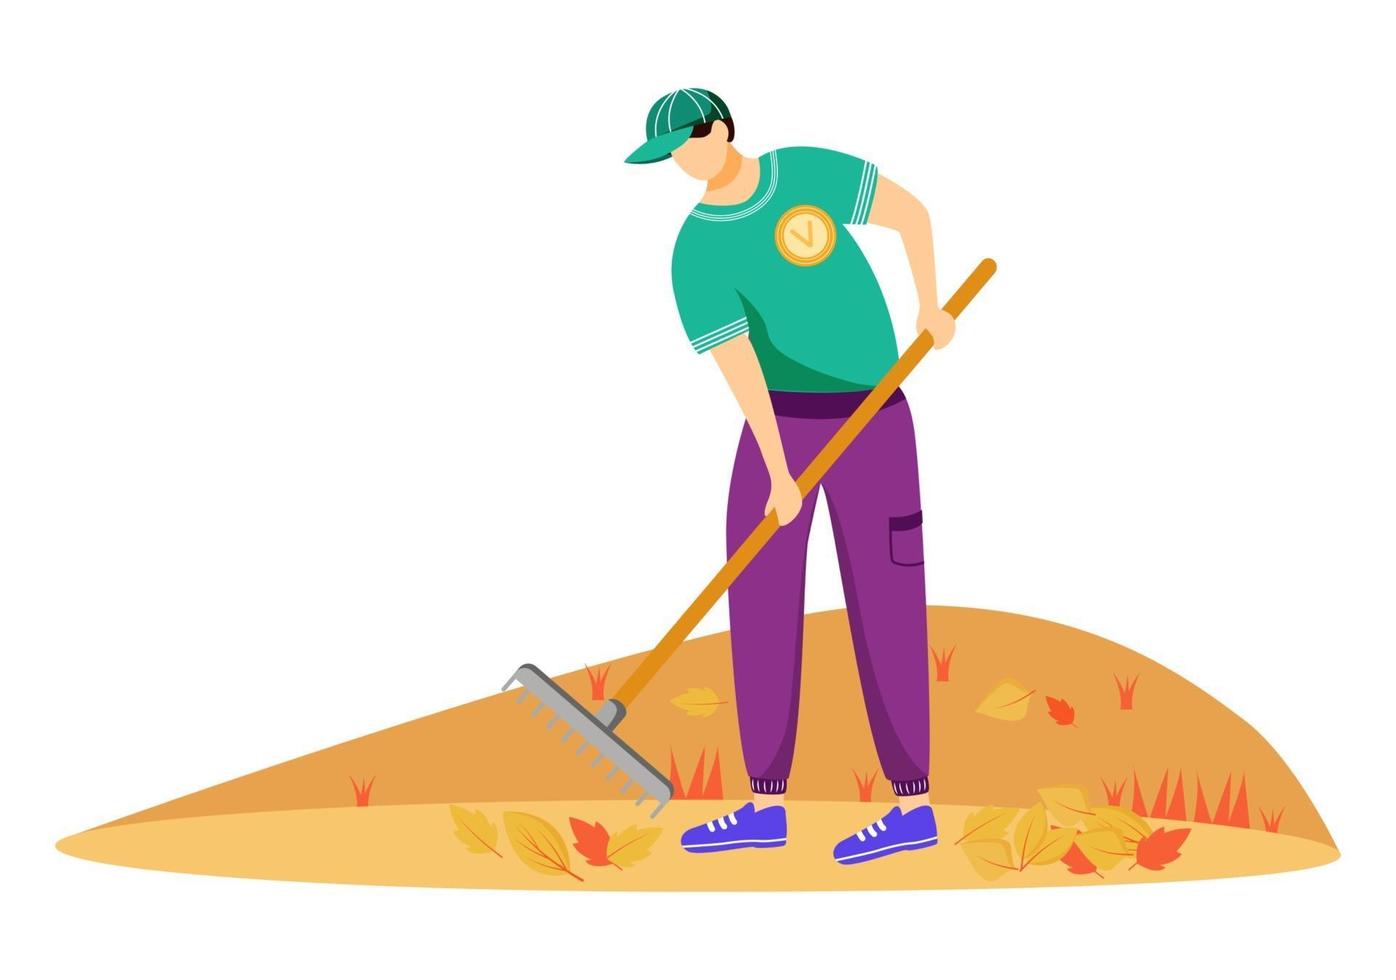 Volunteer cleaning leaves flat vector illustration. Community service worker in uniform isolated cartoon character on white background. Environmental activist working with rakes. Seasonal chores